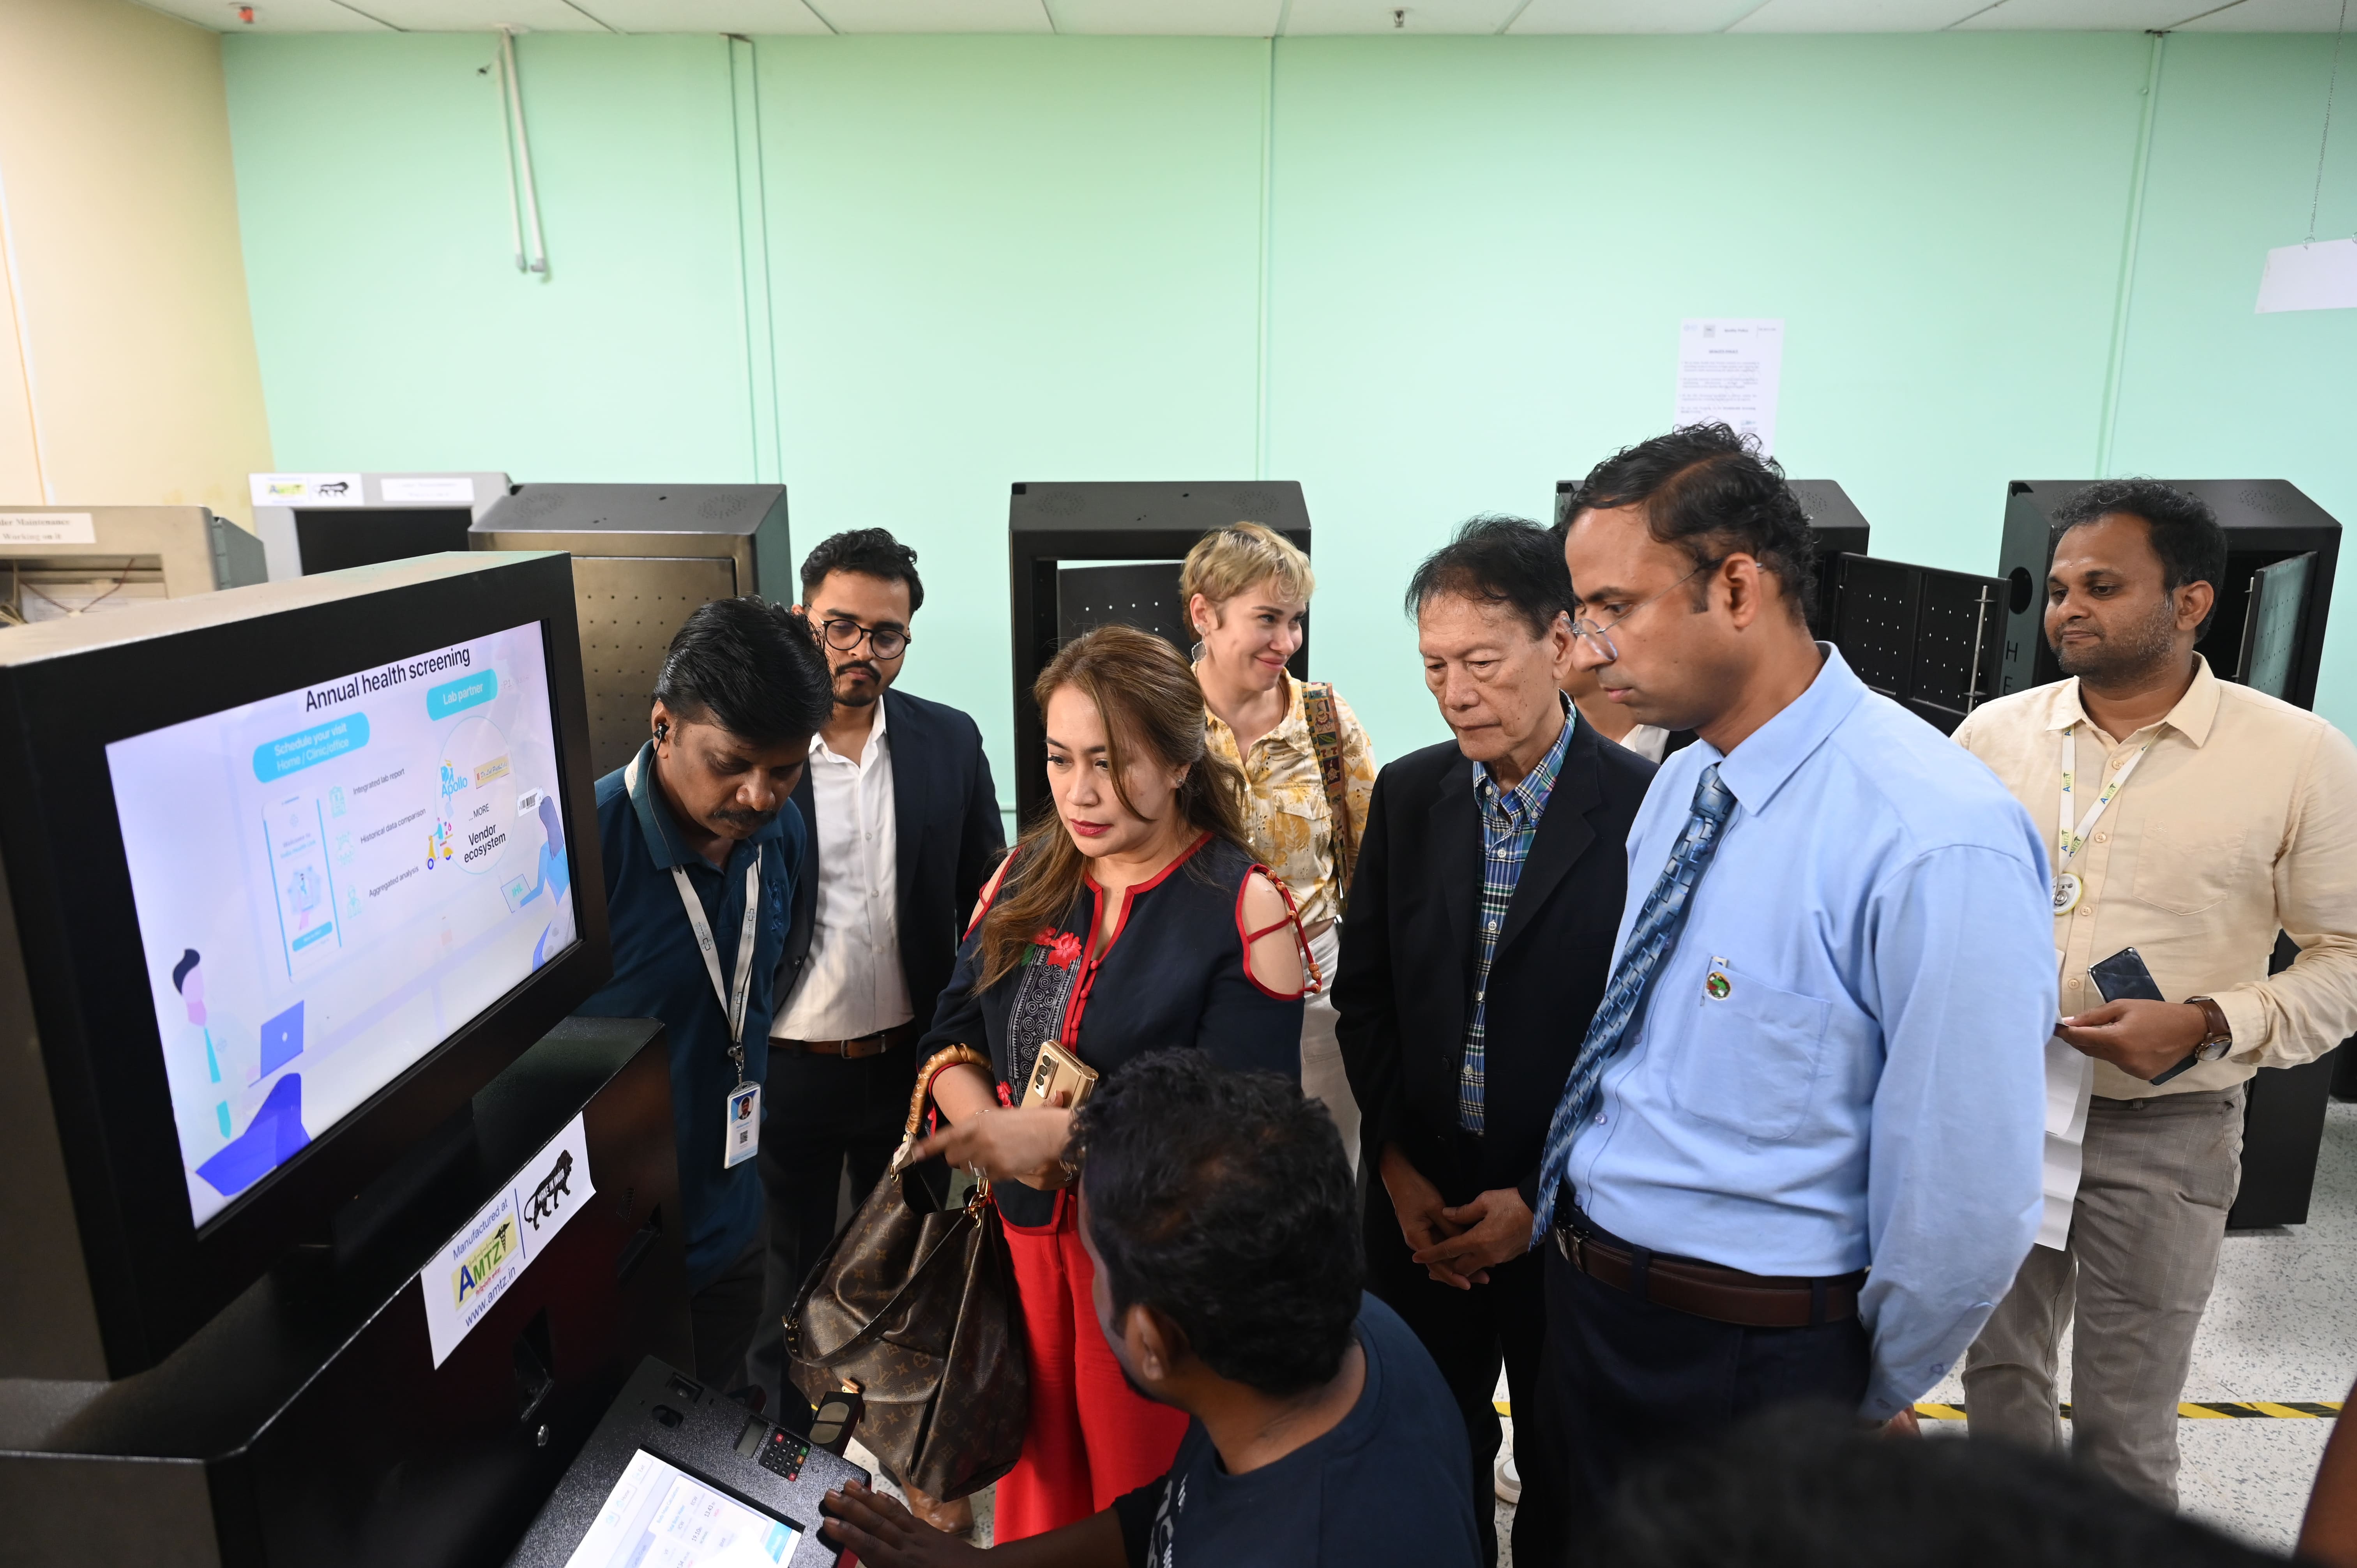 Hon'ble Roberto Pagdanganan, former Governor of Bulacan Philippines visited and met Dr Jitendra Sharma at AMTZ Health Care Medical Technology in India